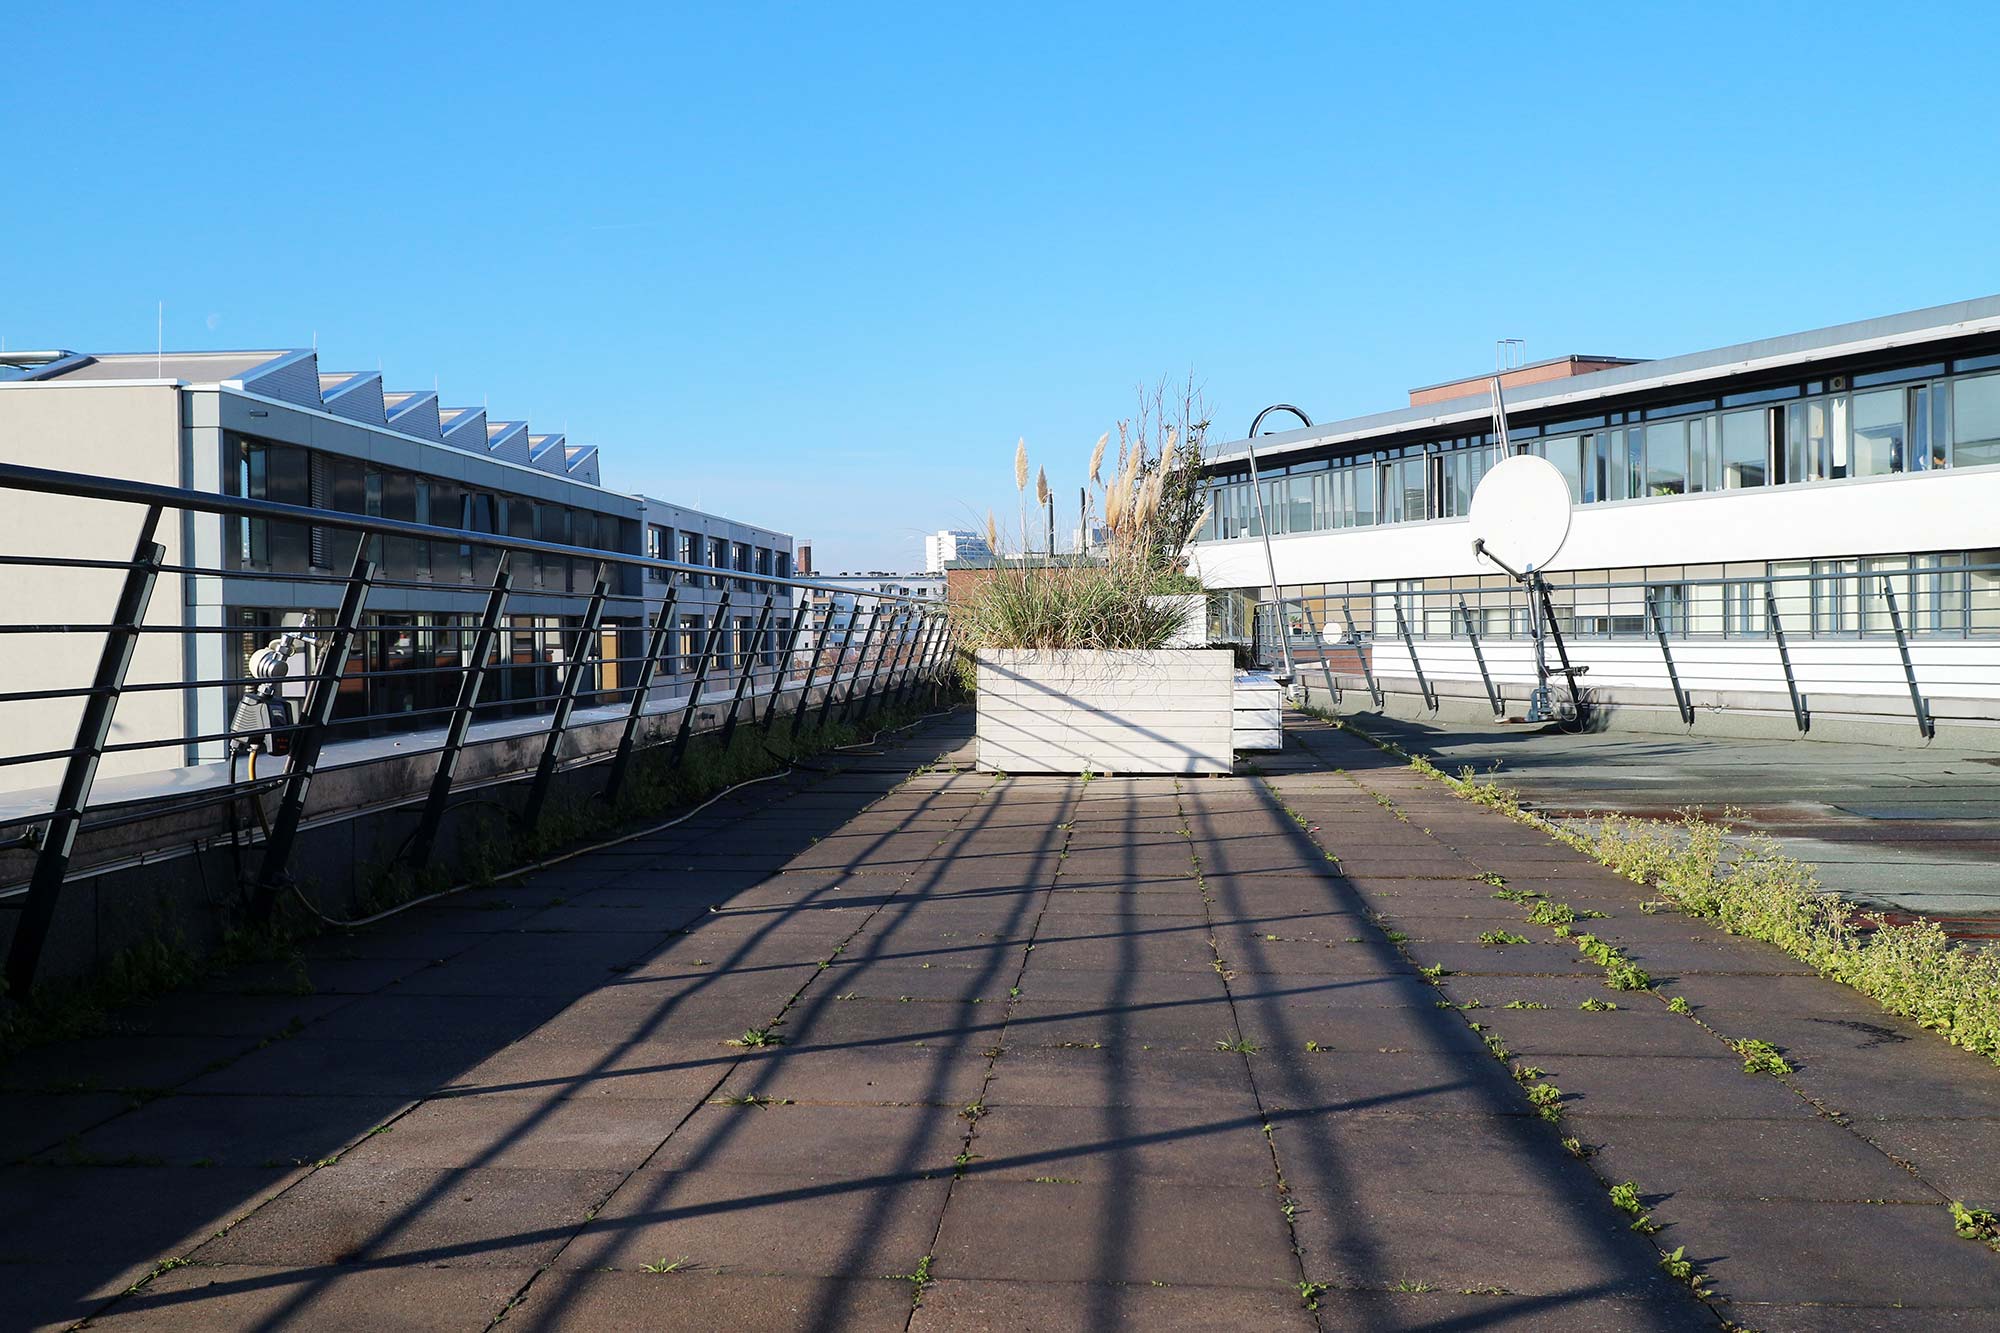 The roof terrace has a railing on both sides; the central area is a large open space; the floor of the terrace consists of black slabs covered by grasses on the right side; a flower box can be seen in the background; other office buildings can be seen on the right and left sides of the picture; the sky is bright blue